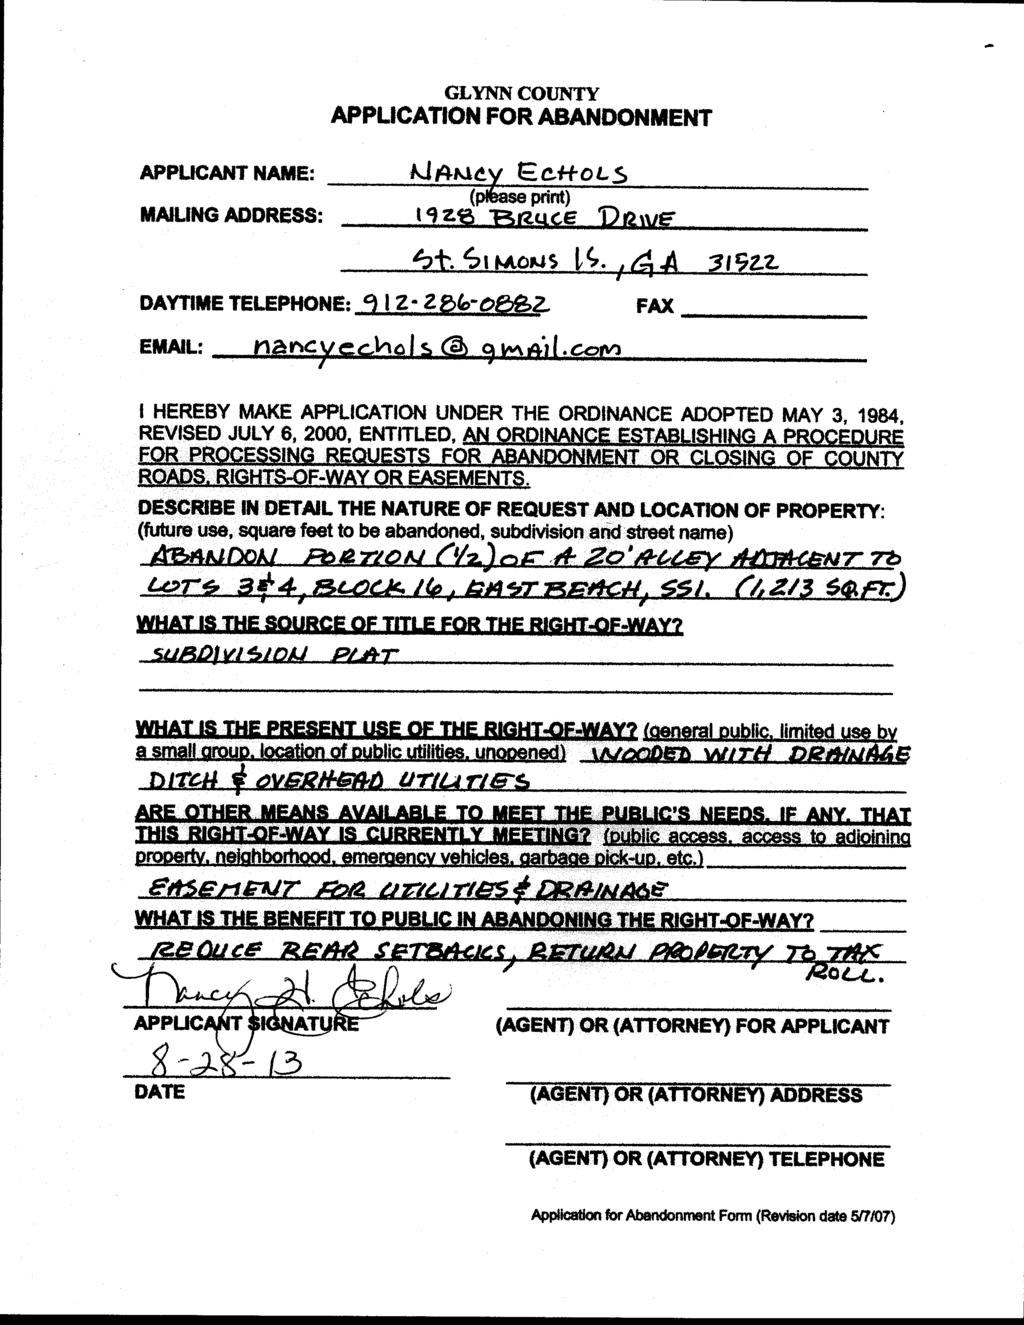 GLYNN COUNTY APPLICATION FOR ABANDONMENT APPLICANT NAME: k1$my C4+0LS (pase print) MAILING ADDRESS: I9Z FfVtCE DlauE 7tE'IMoP4S 41 A 31922 DAYTIME TELEPHONE: _' I Z FAX EMAIL: rarcyecii S () c